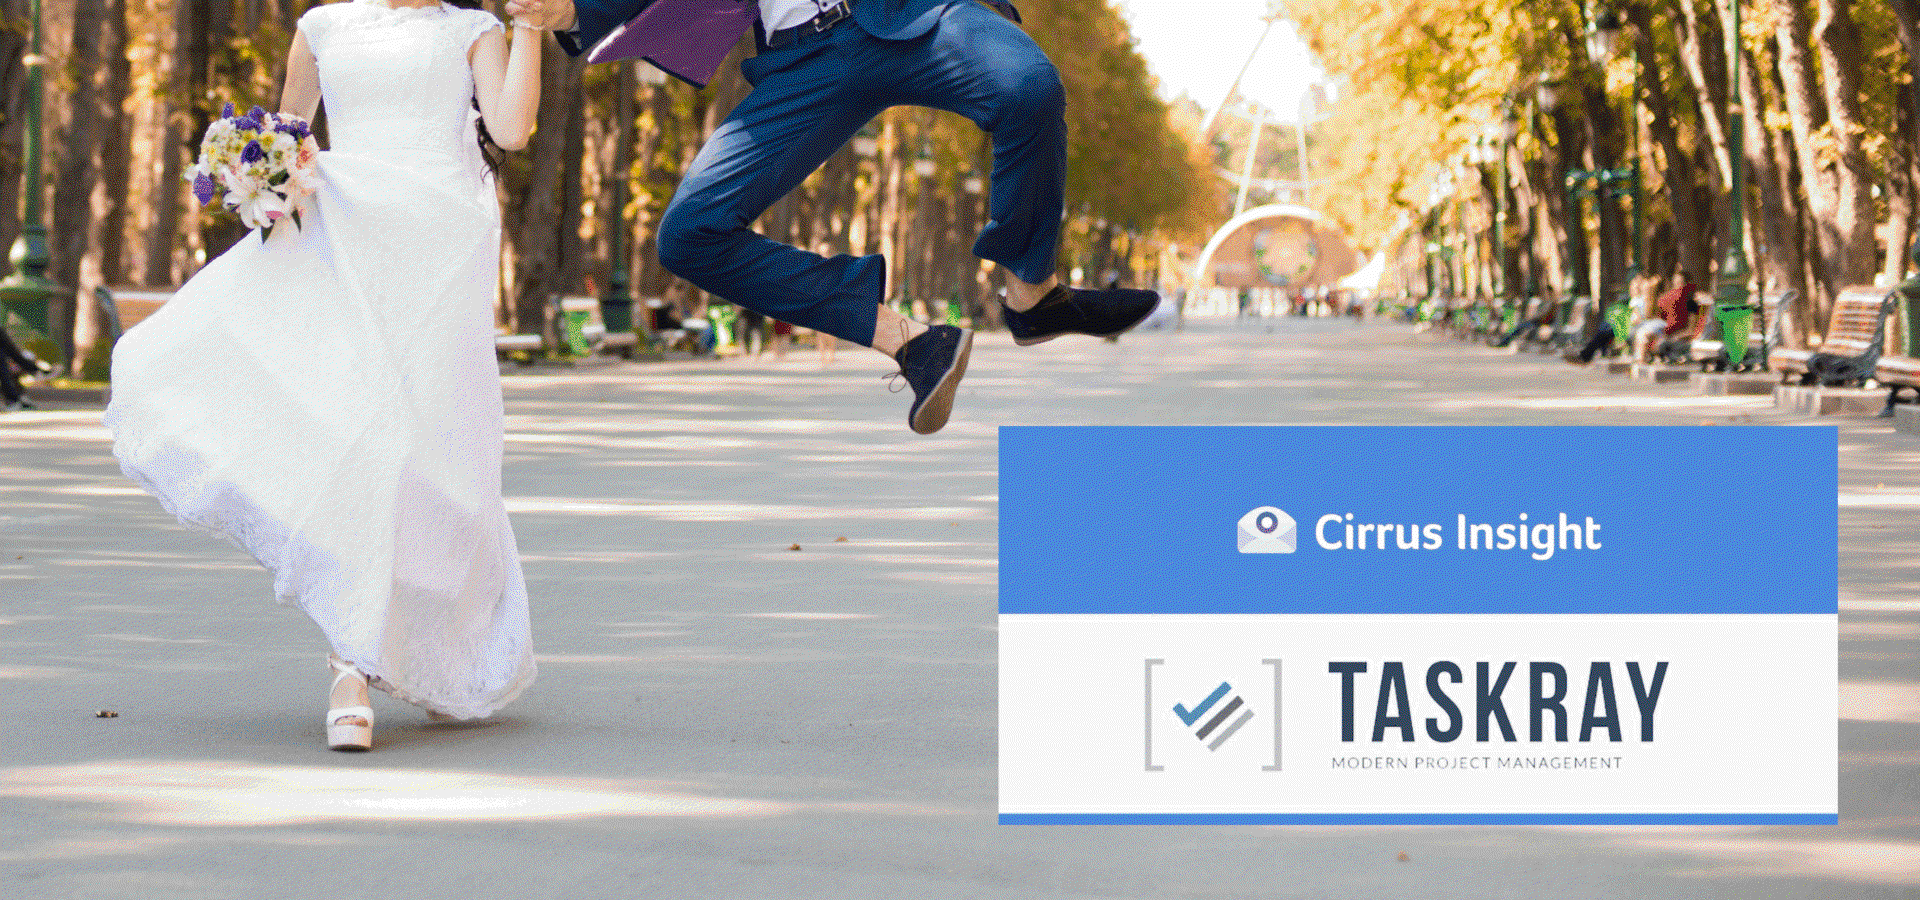 Appy Ever After: Taskray and Cirrus Insights